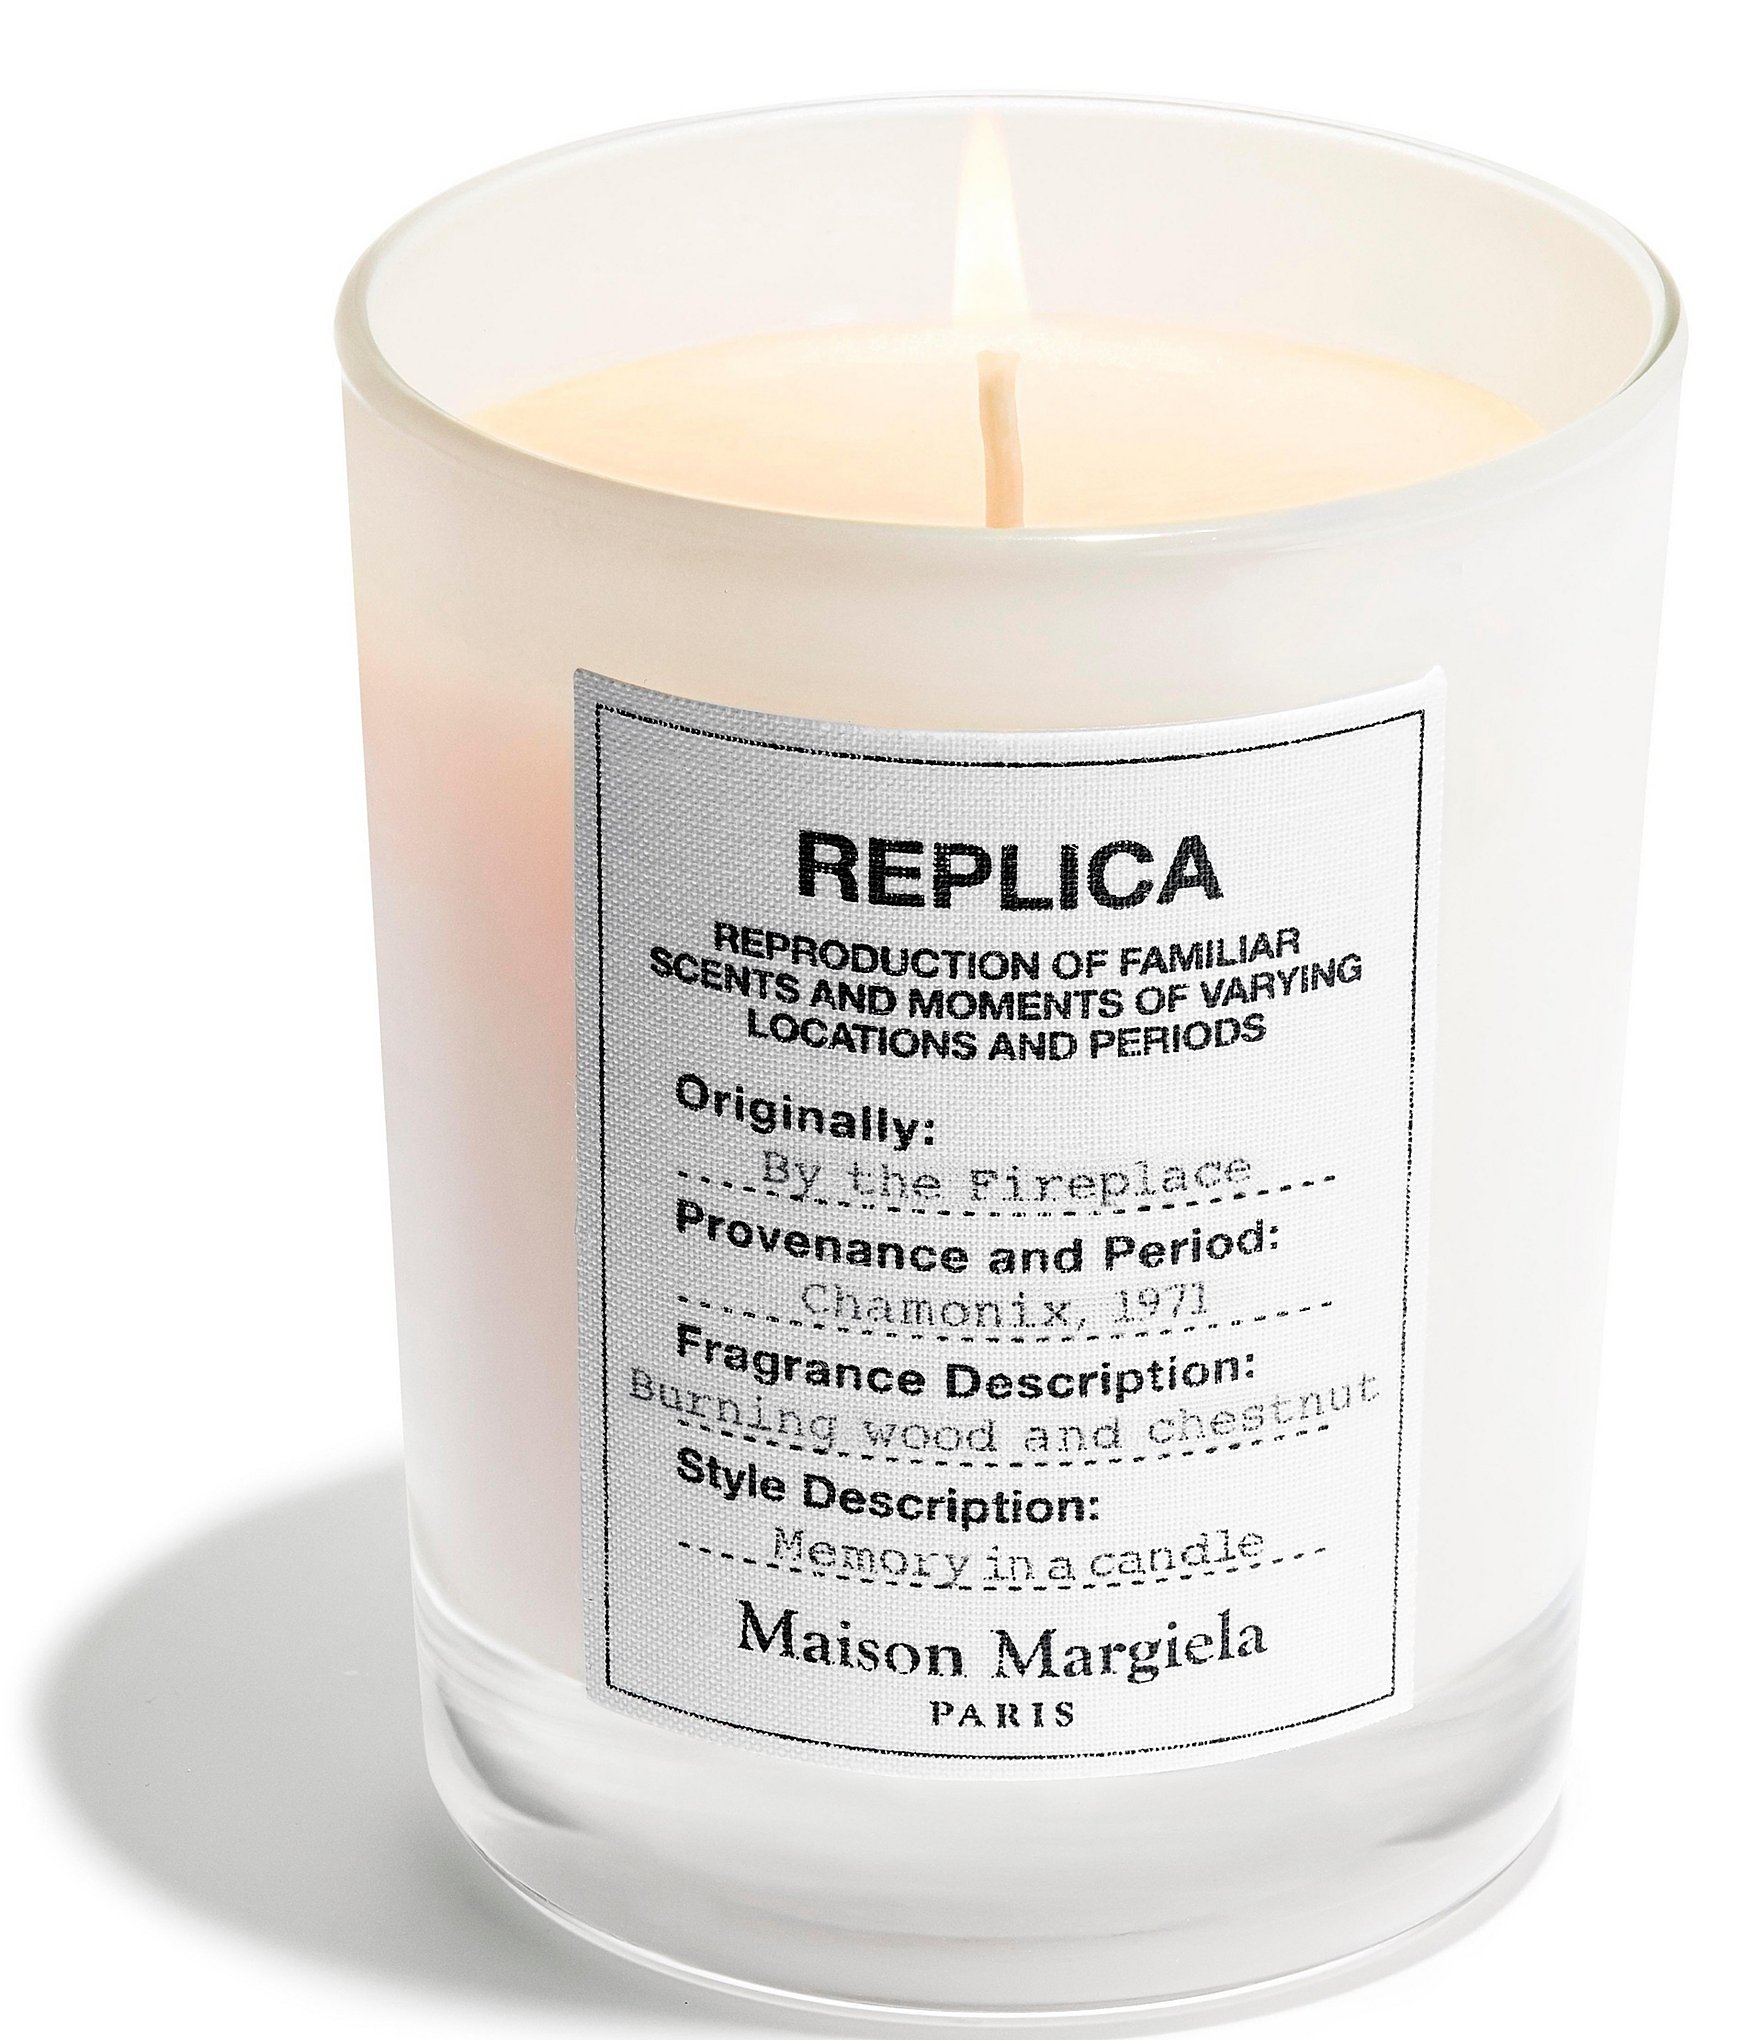 Maison Margiela REPLICA By the Fireplace Scented Candle, 5.8-oz., Dillard's